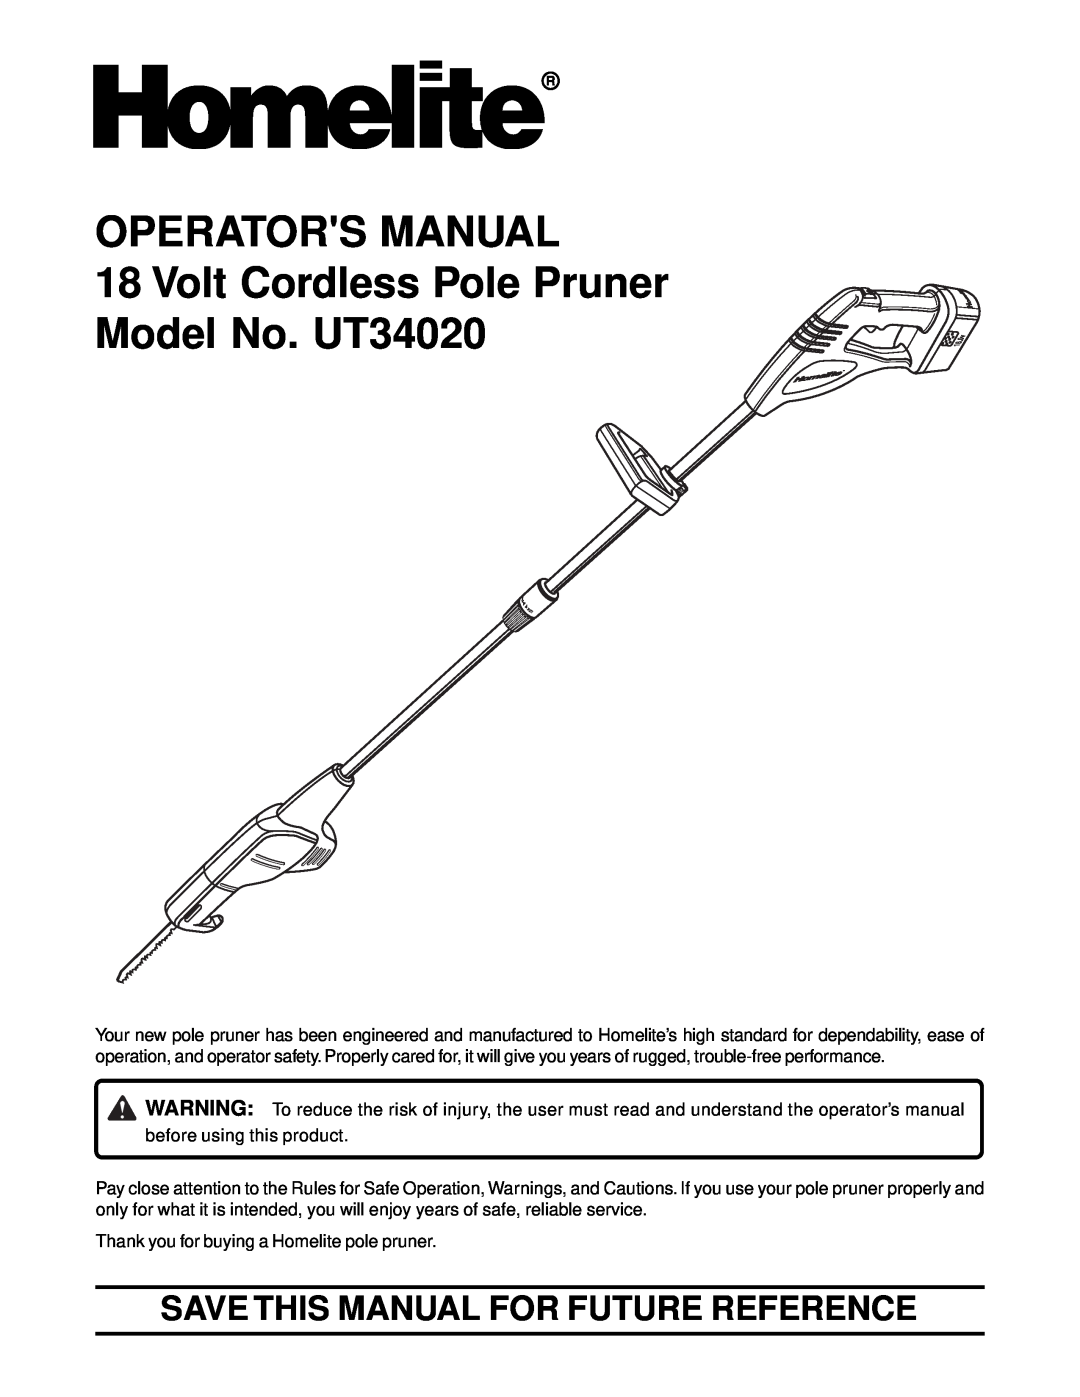 Homelite manual OPERATORS MANUAL 18 Volt Cordless Pole Pruner Model No. UT34020, Save This Manual For Future Reference 